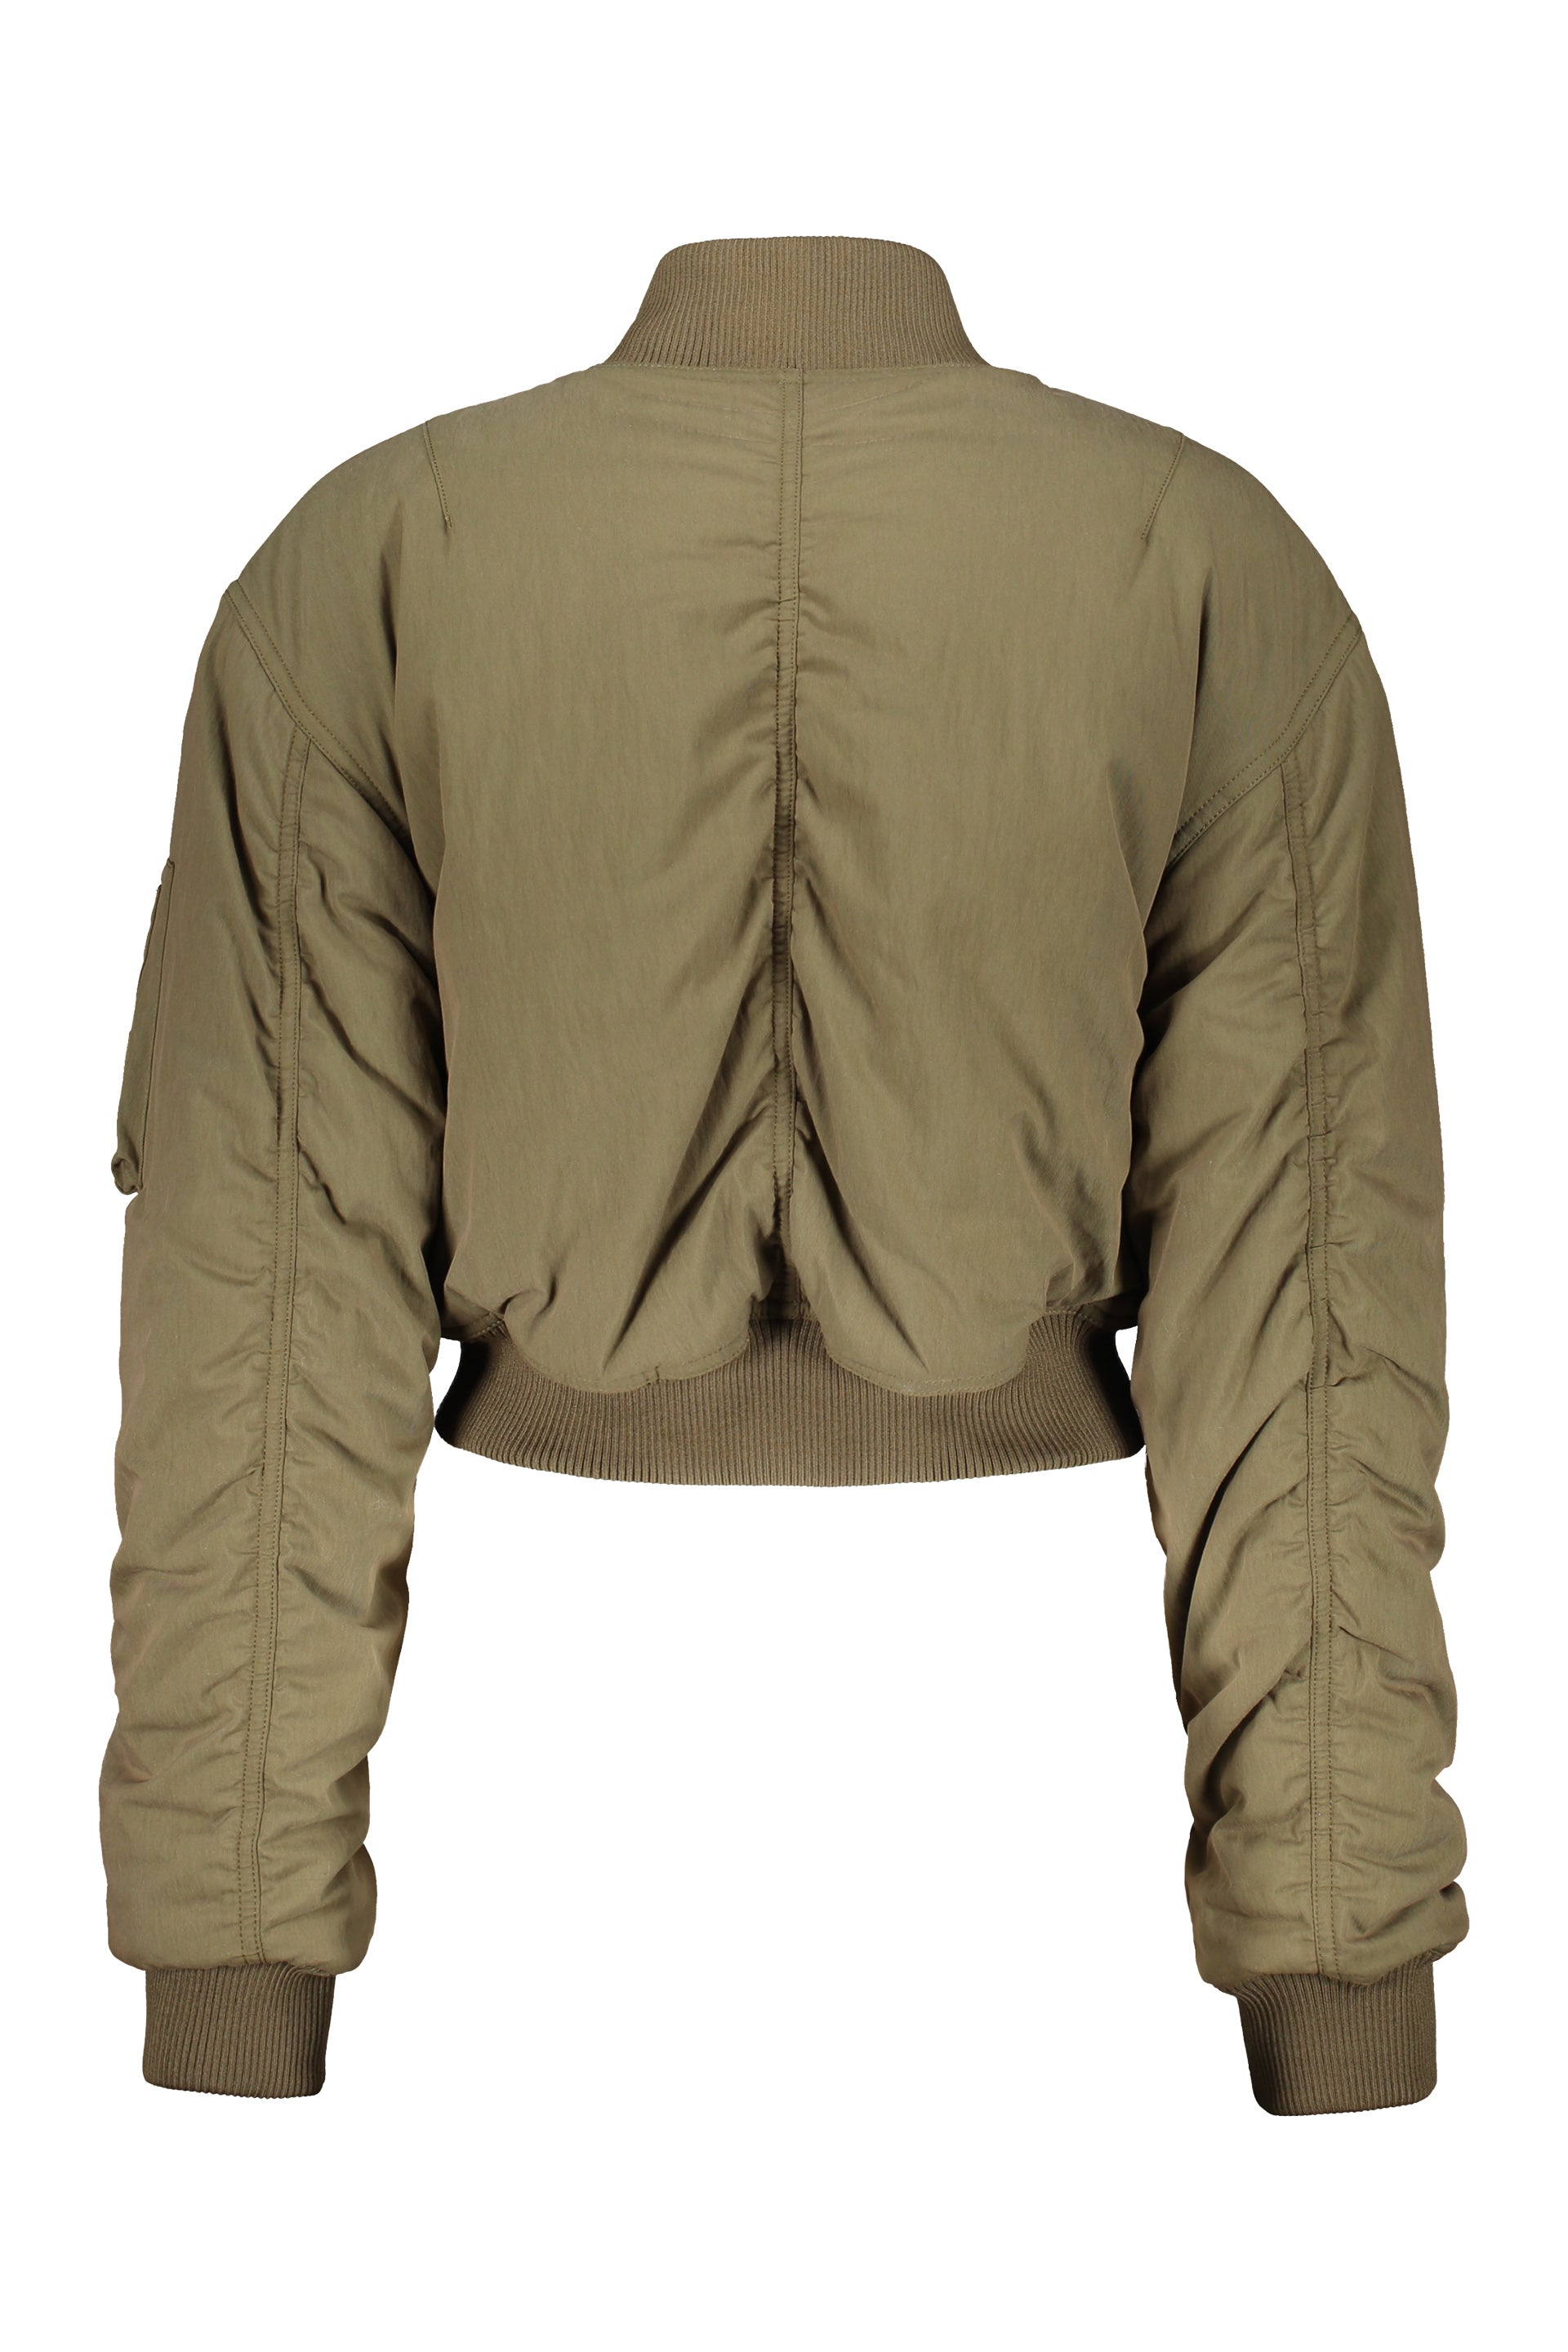 Palm-Angels-OUTLET-SALE-Padded-bomber-jacket-Jacken-Mantel-ARCHIVE-COLLECTION-2.jpg